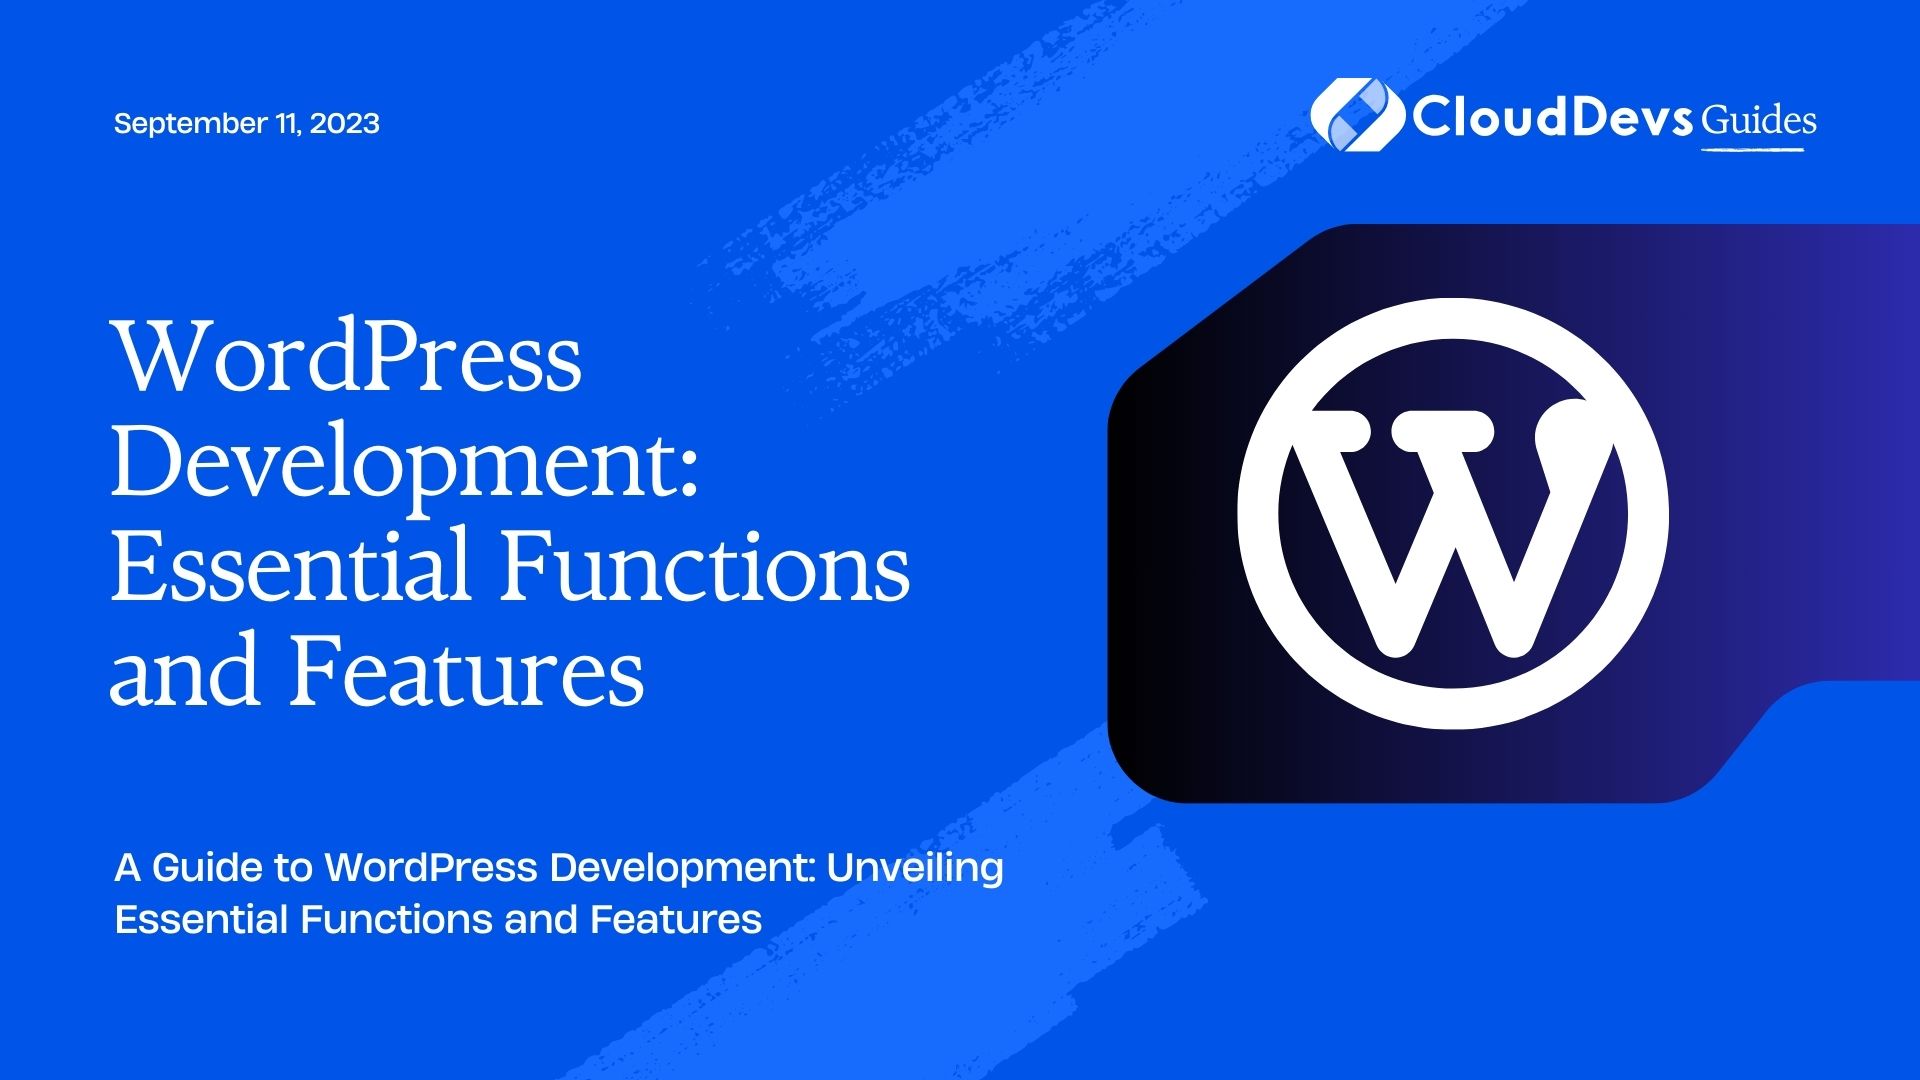 WordPress Development: Essential Functions and Features